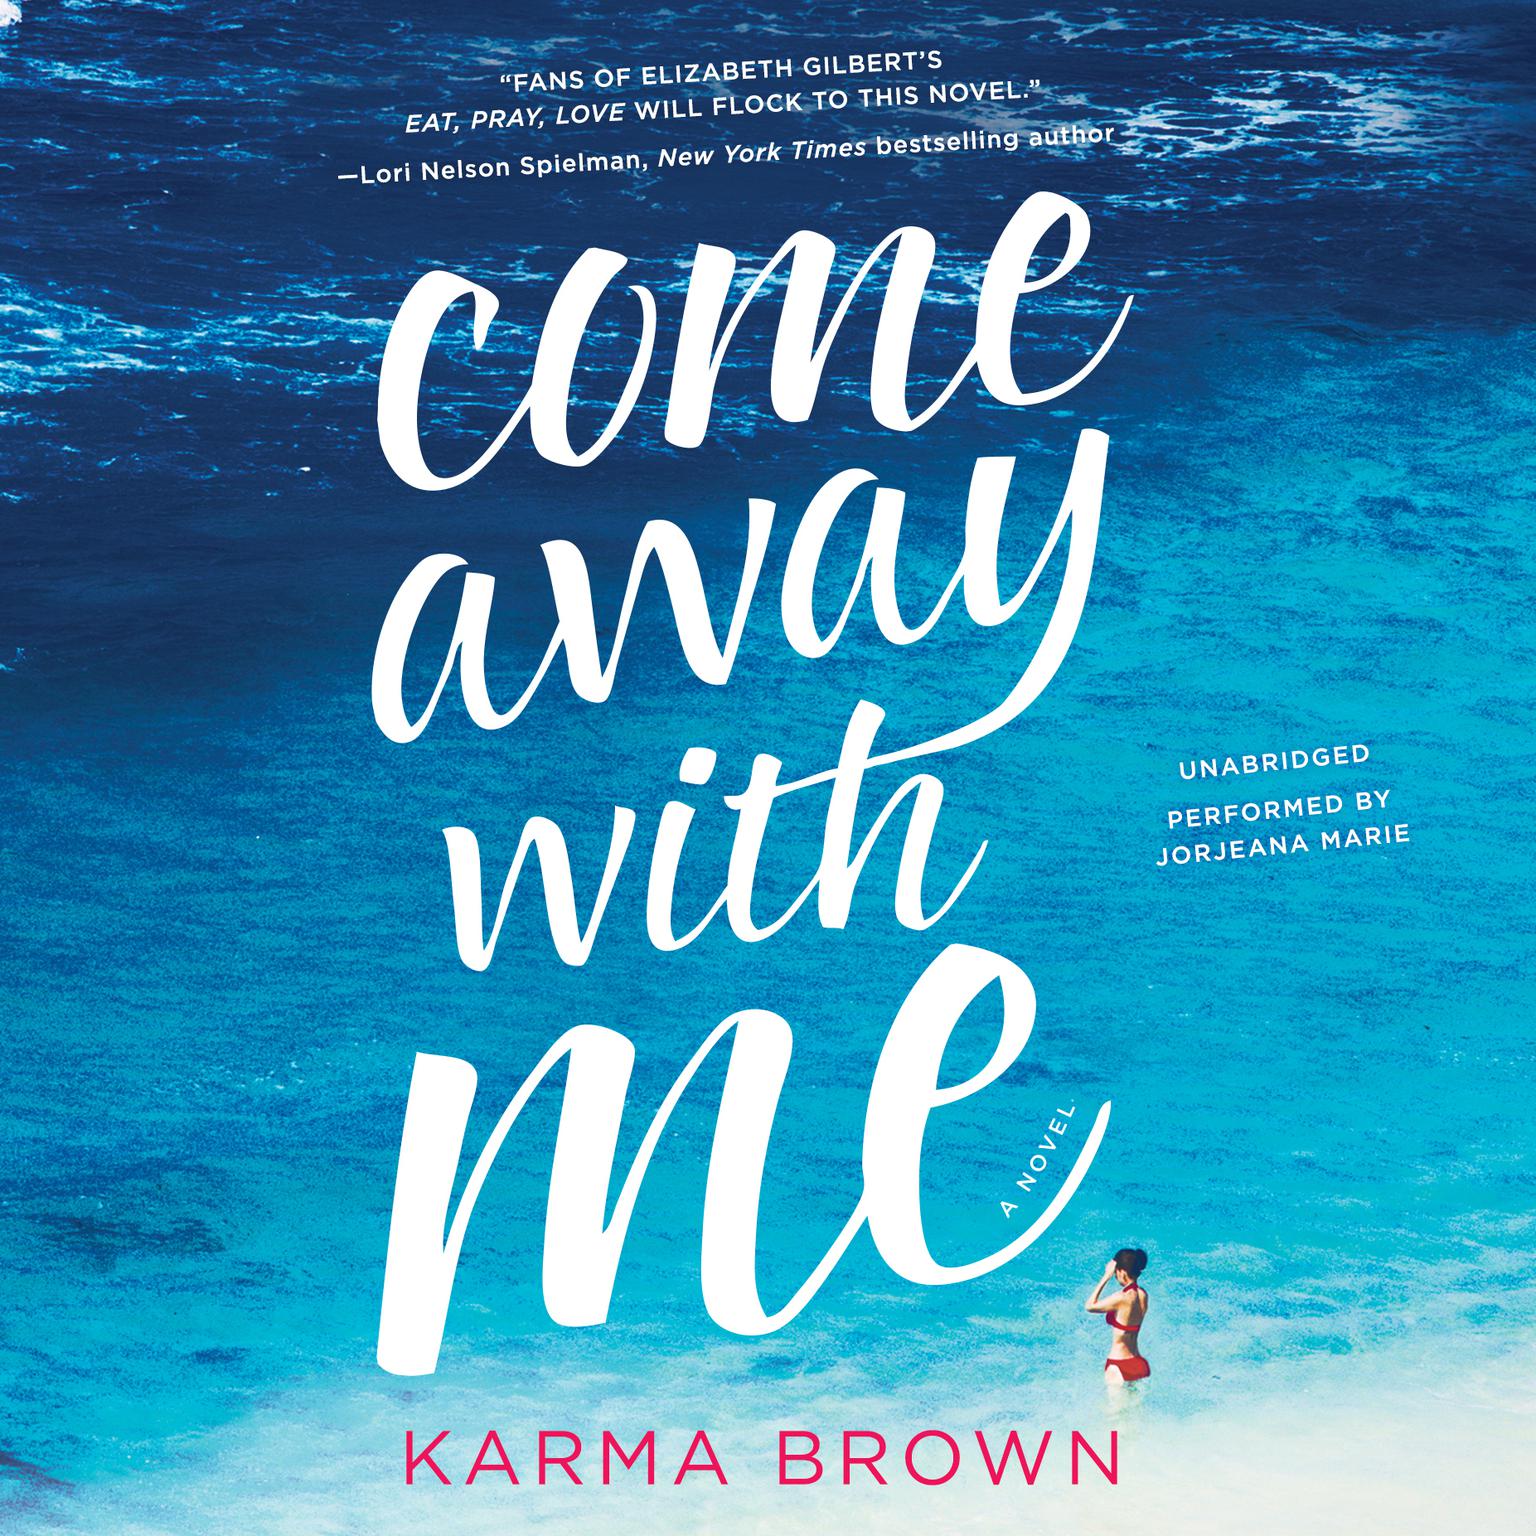 Come Away With Me Audiobook, by Karma Brown